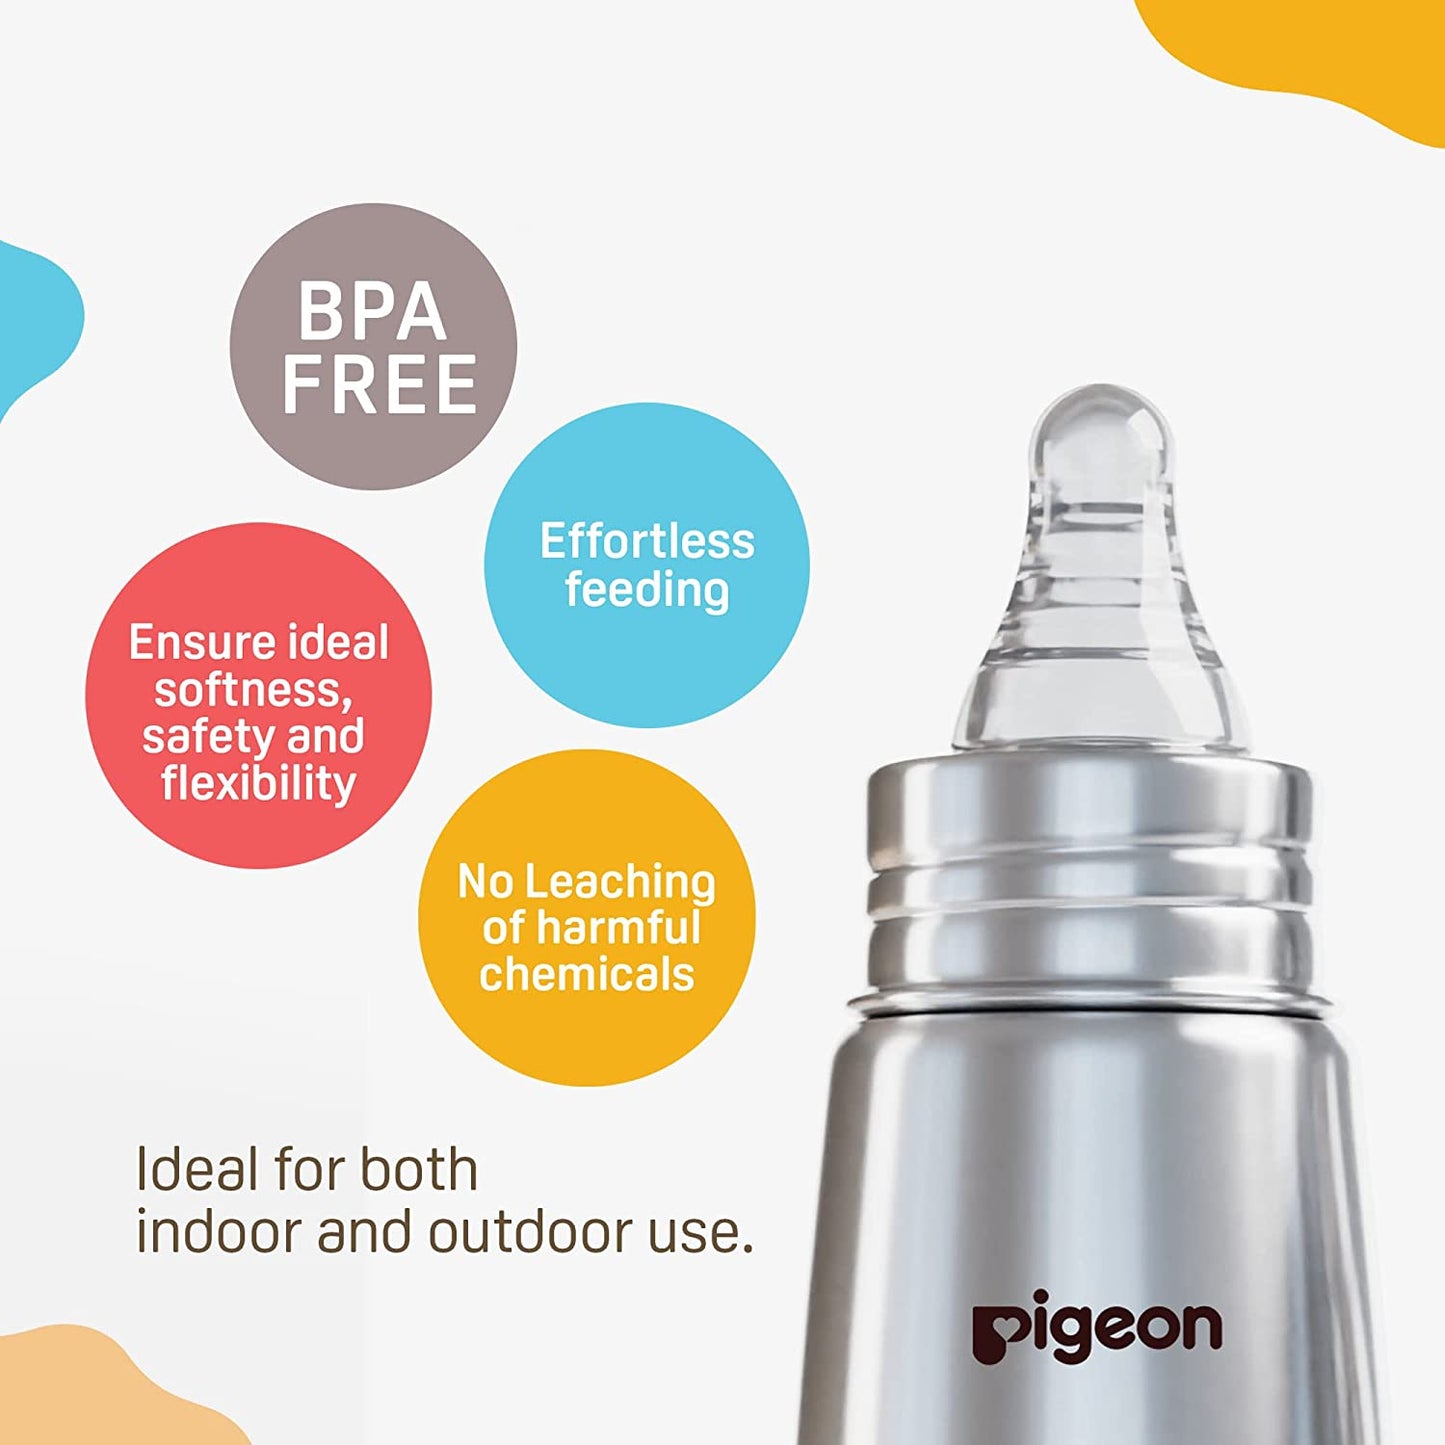 Pigeon Stainless Steel Feeding Baby Bottle (220ml) - Size Y